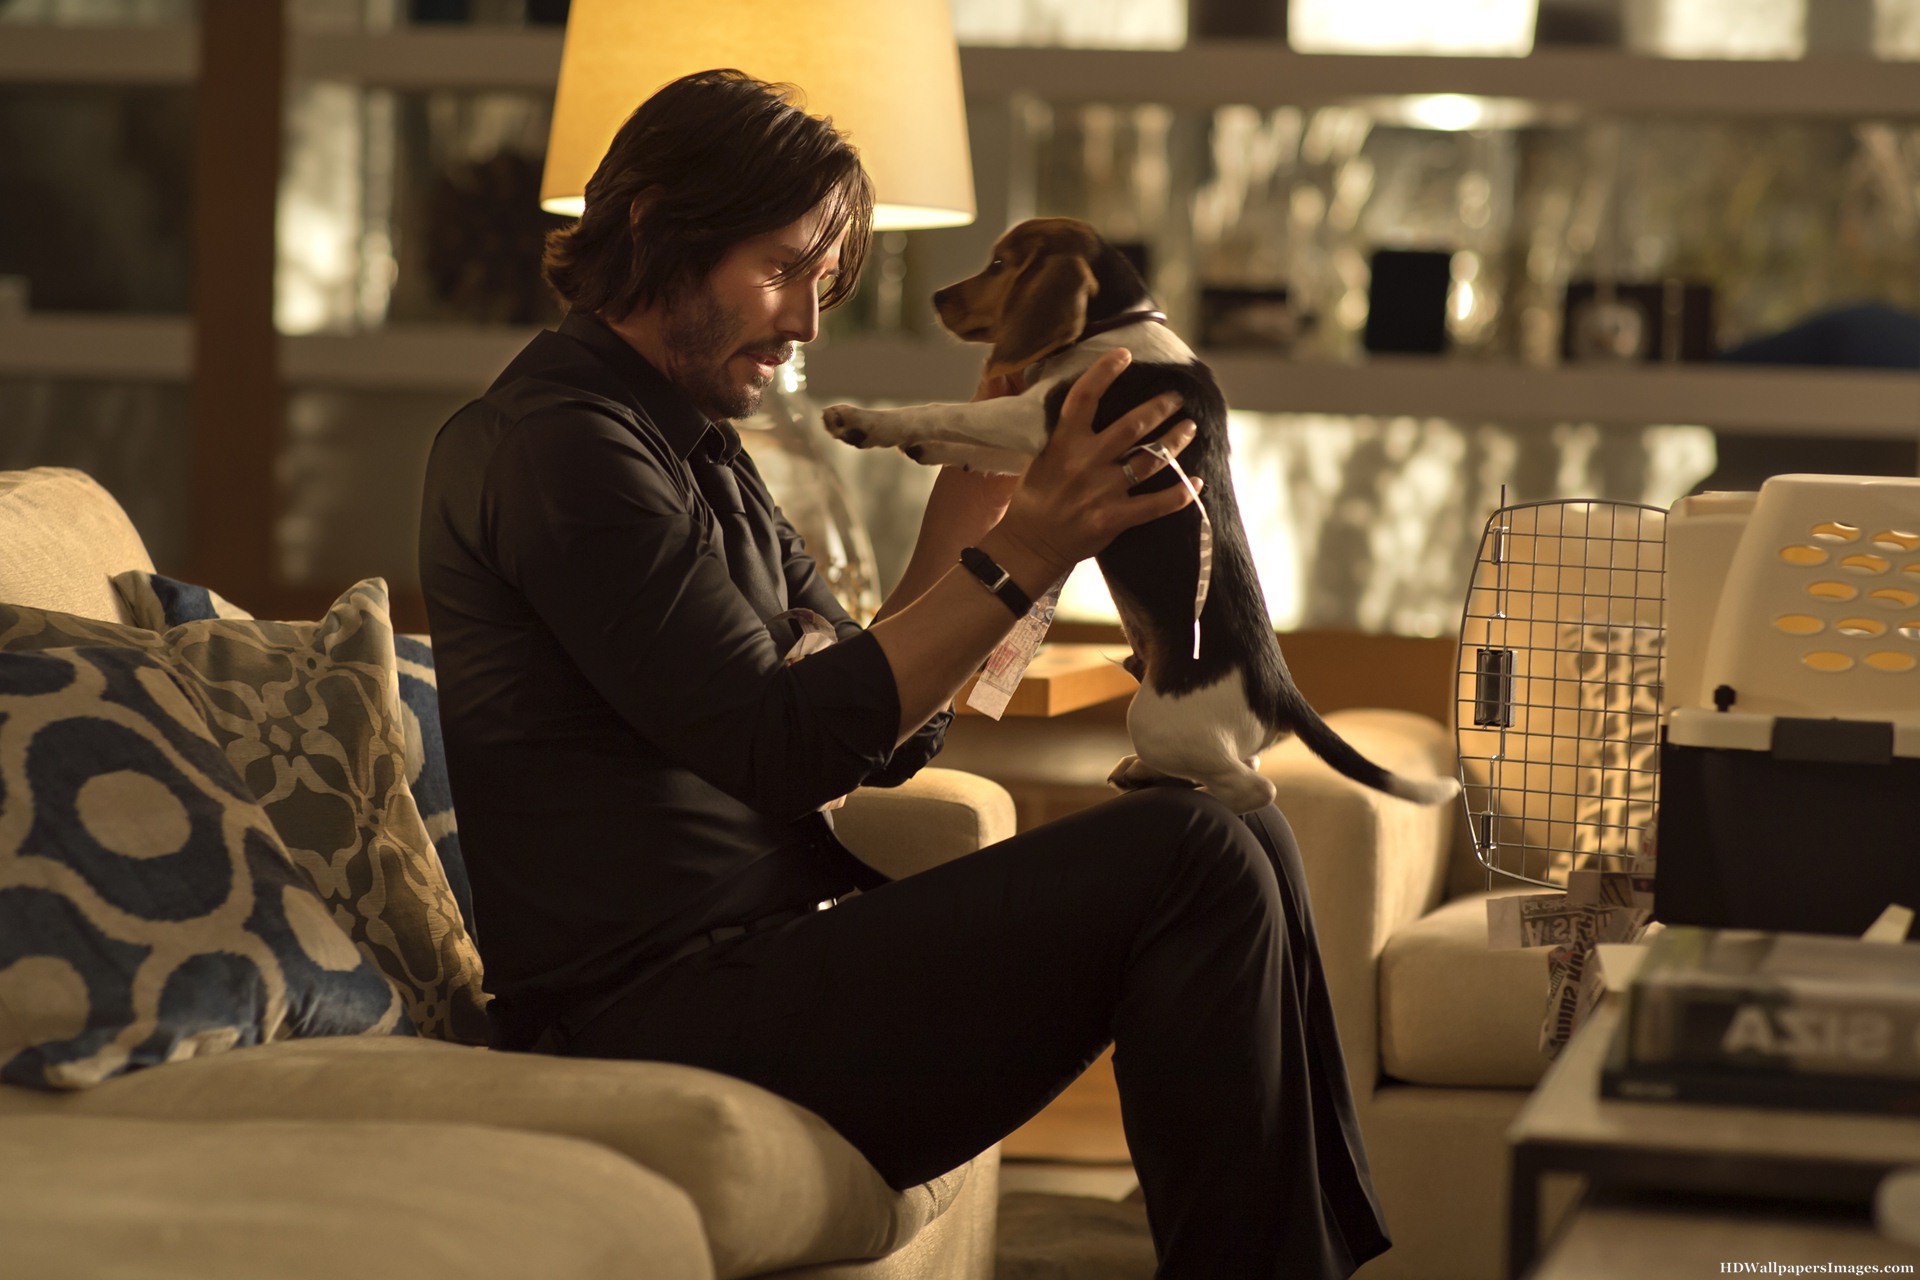 John Wick As Keanu Reeves And Dog Wallpapers